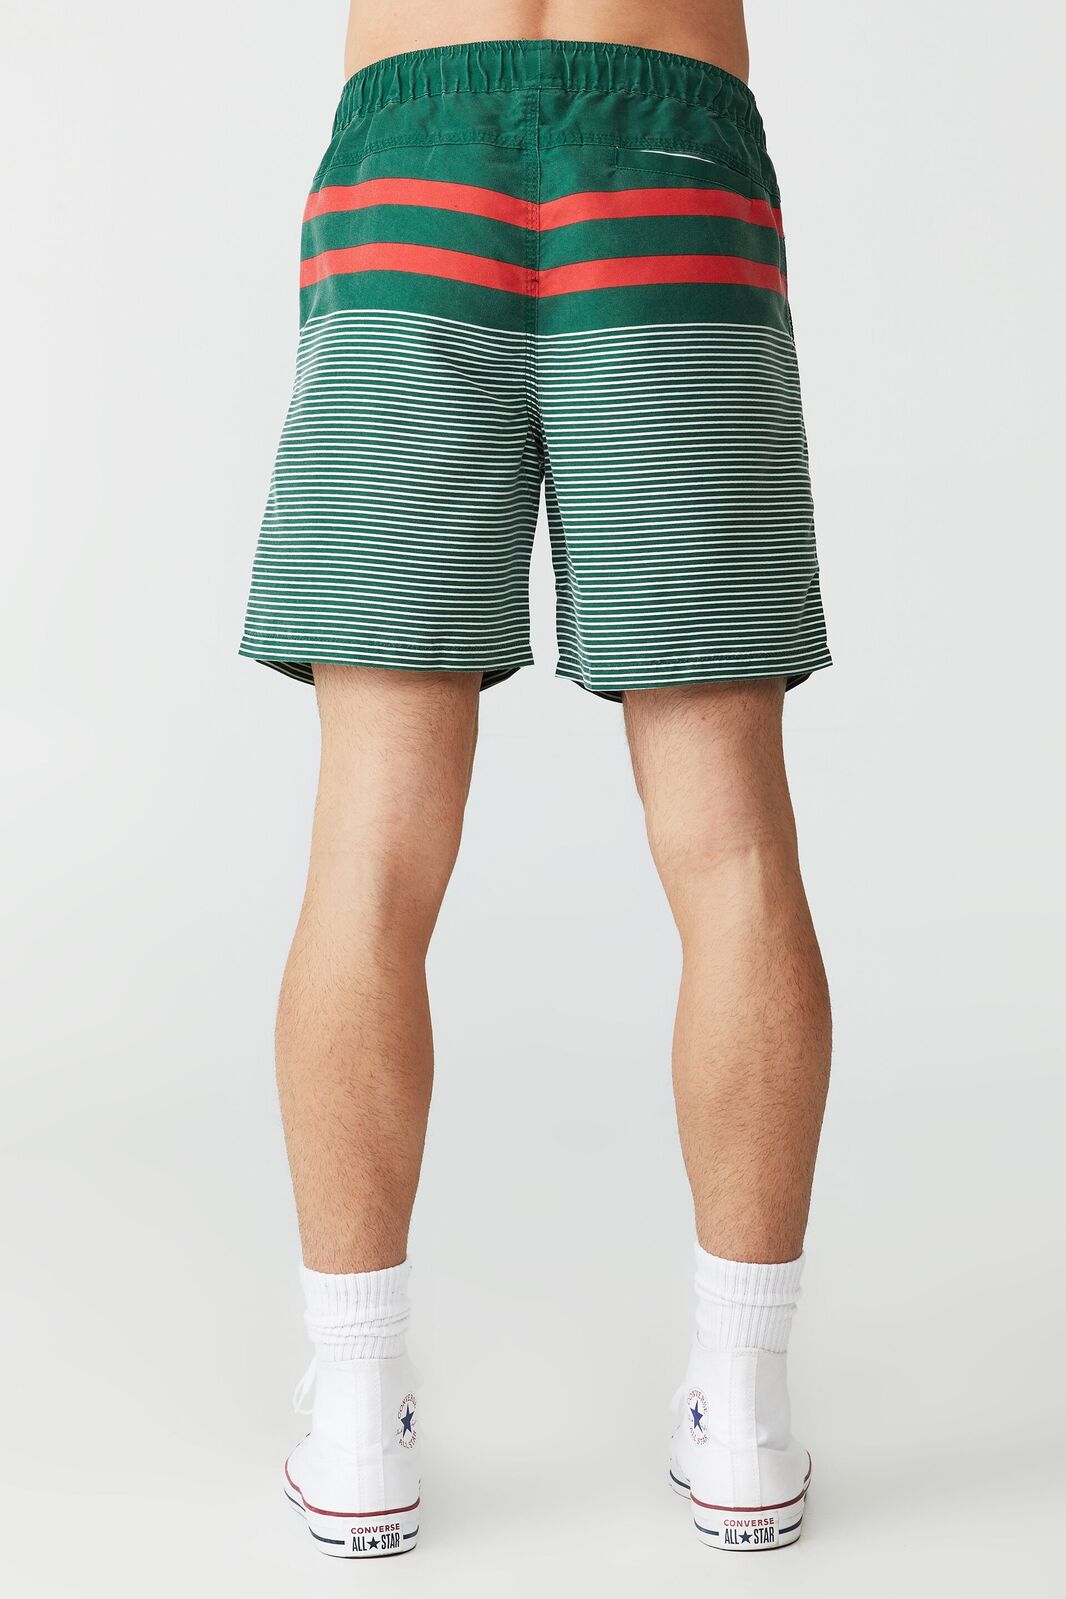 South Syd Rabbitohs NRL 2022 Cotton On Striped Board Shorts Sizes S-2XL! 